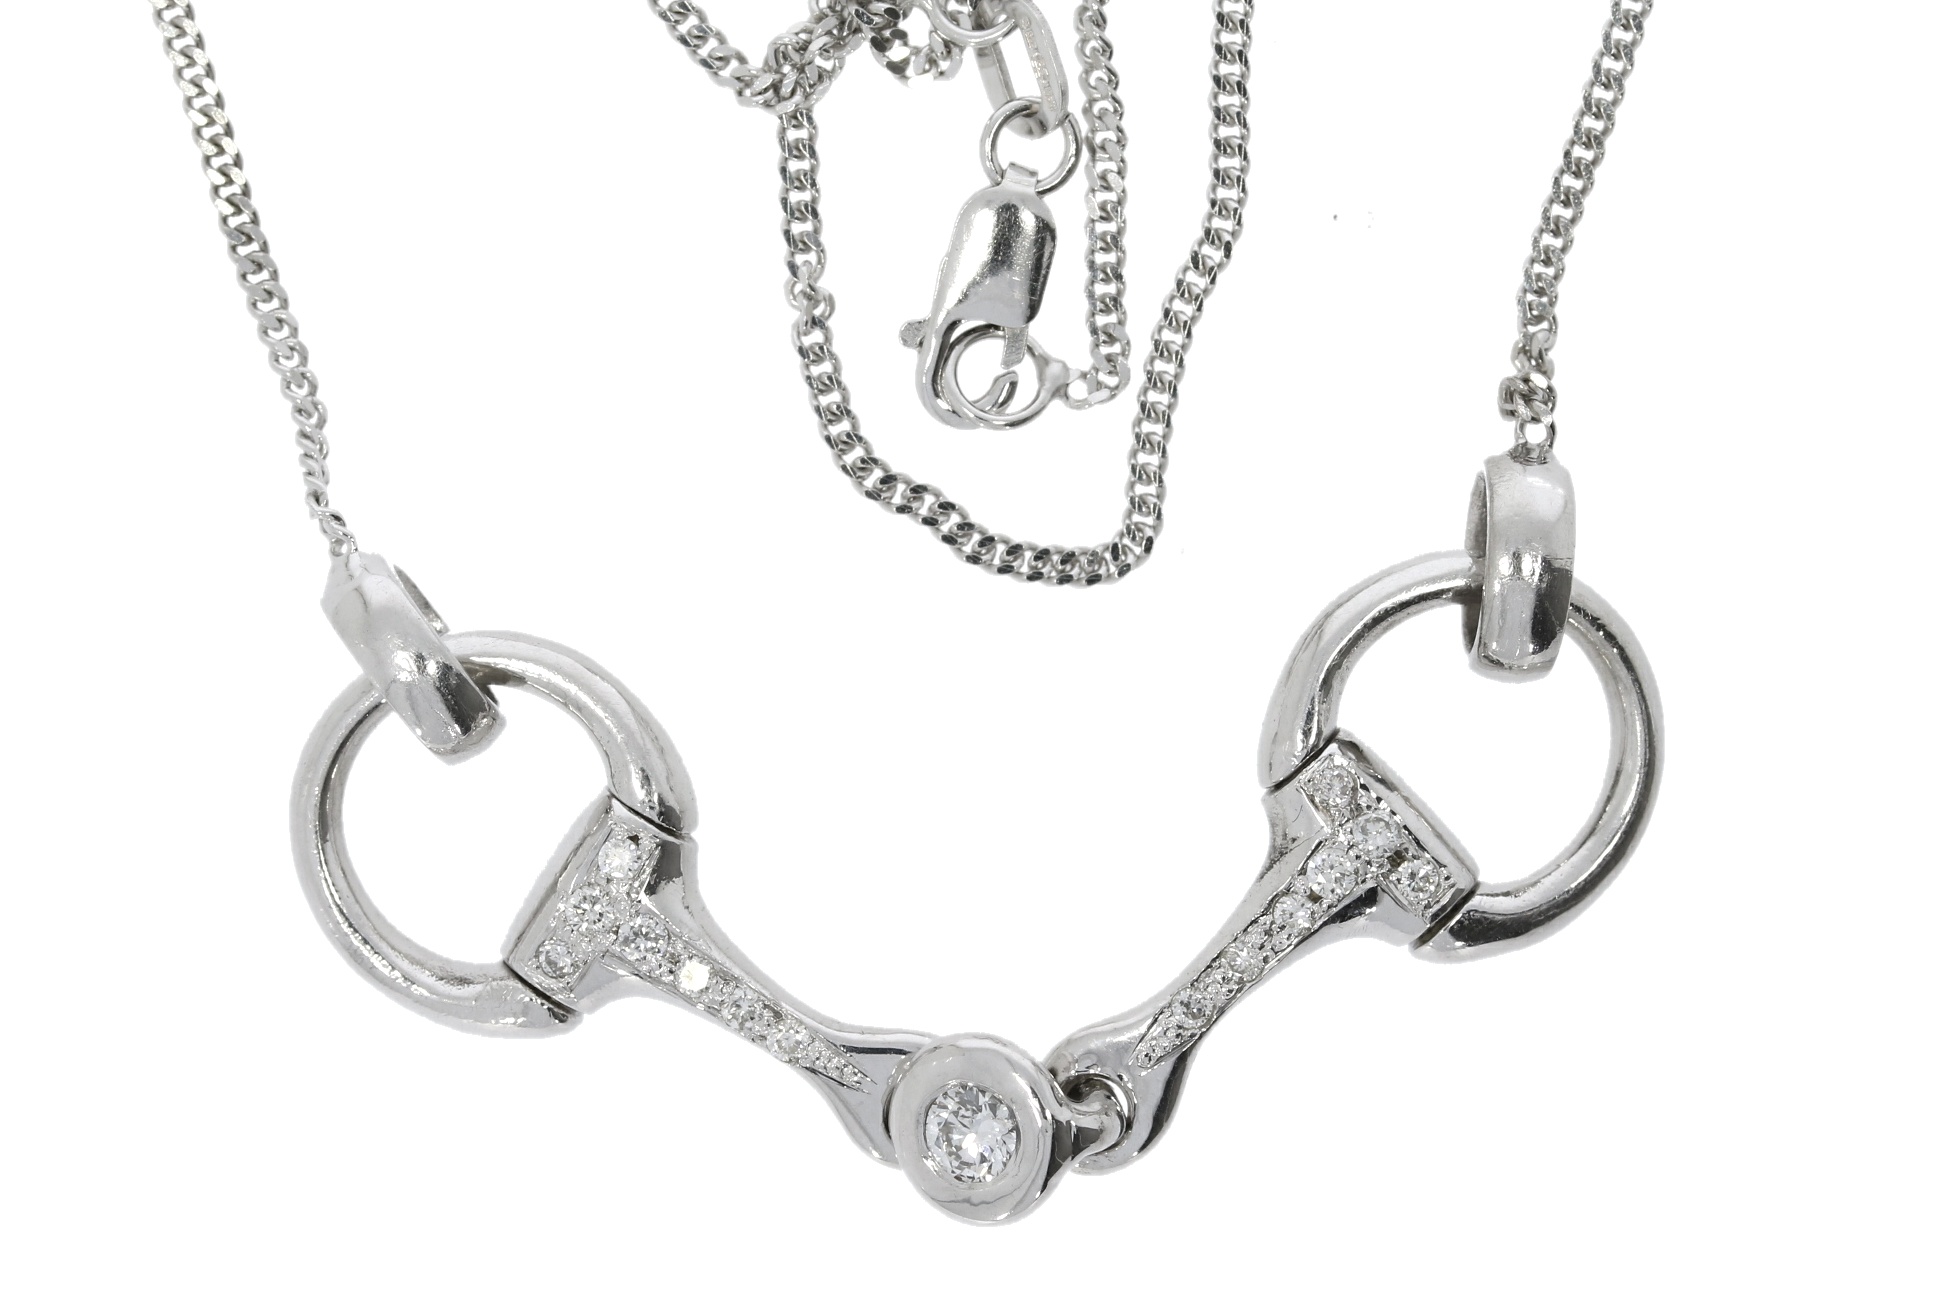 Equestrian Jewellery Collection 9ct White Gold Diamond Set Snaffle Bit Horse Equestrian Pendant